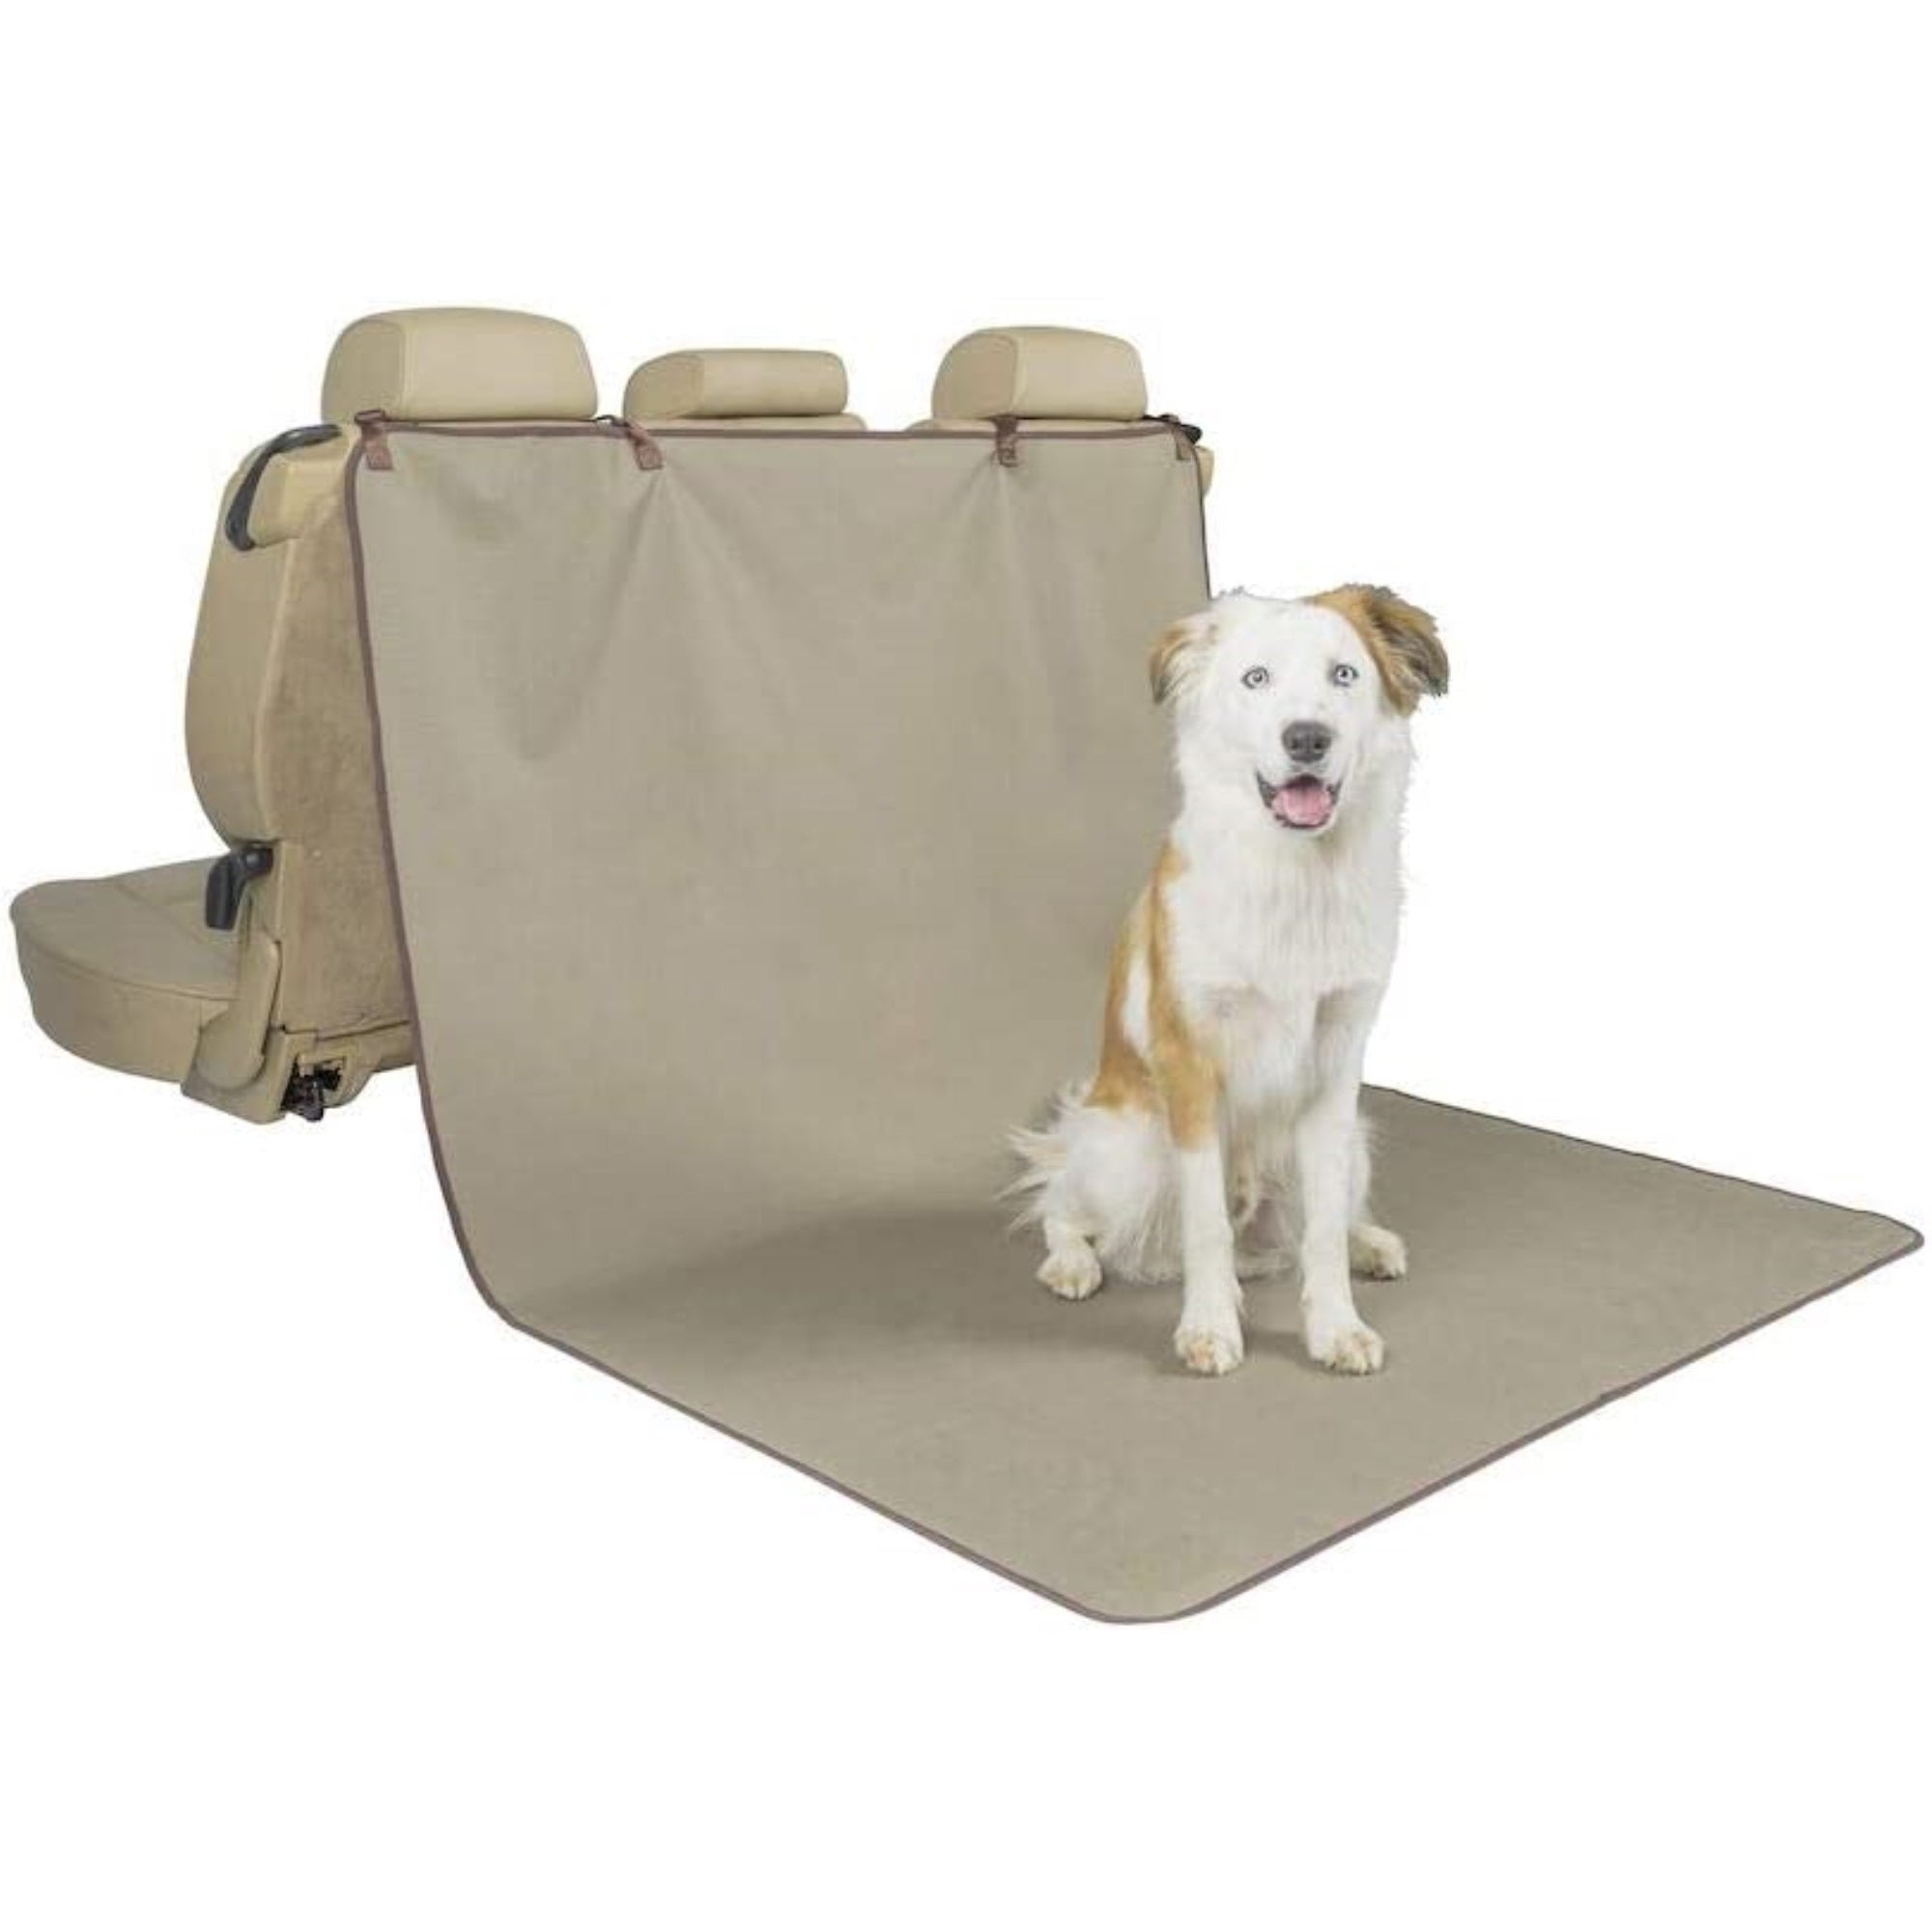 PetSafe Happy Ride Waterproof Cargo Cover for Pets, Fits Most Vehicles, Tan